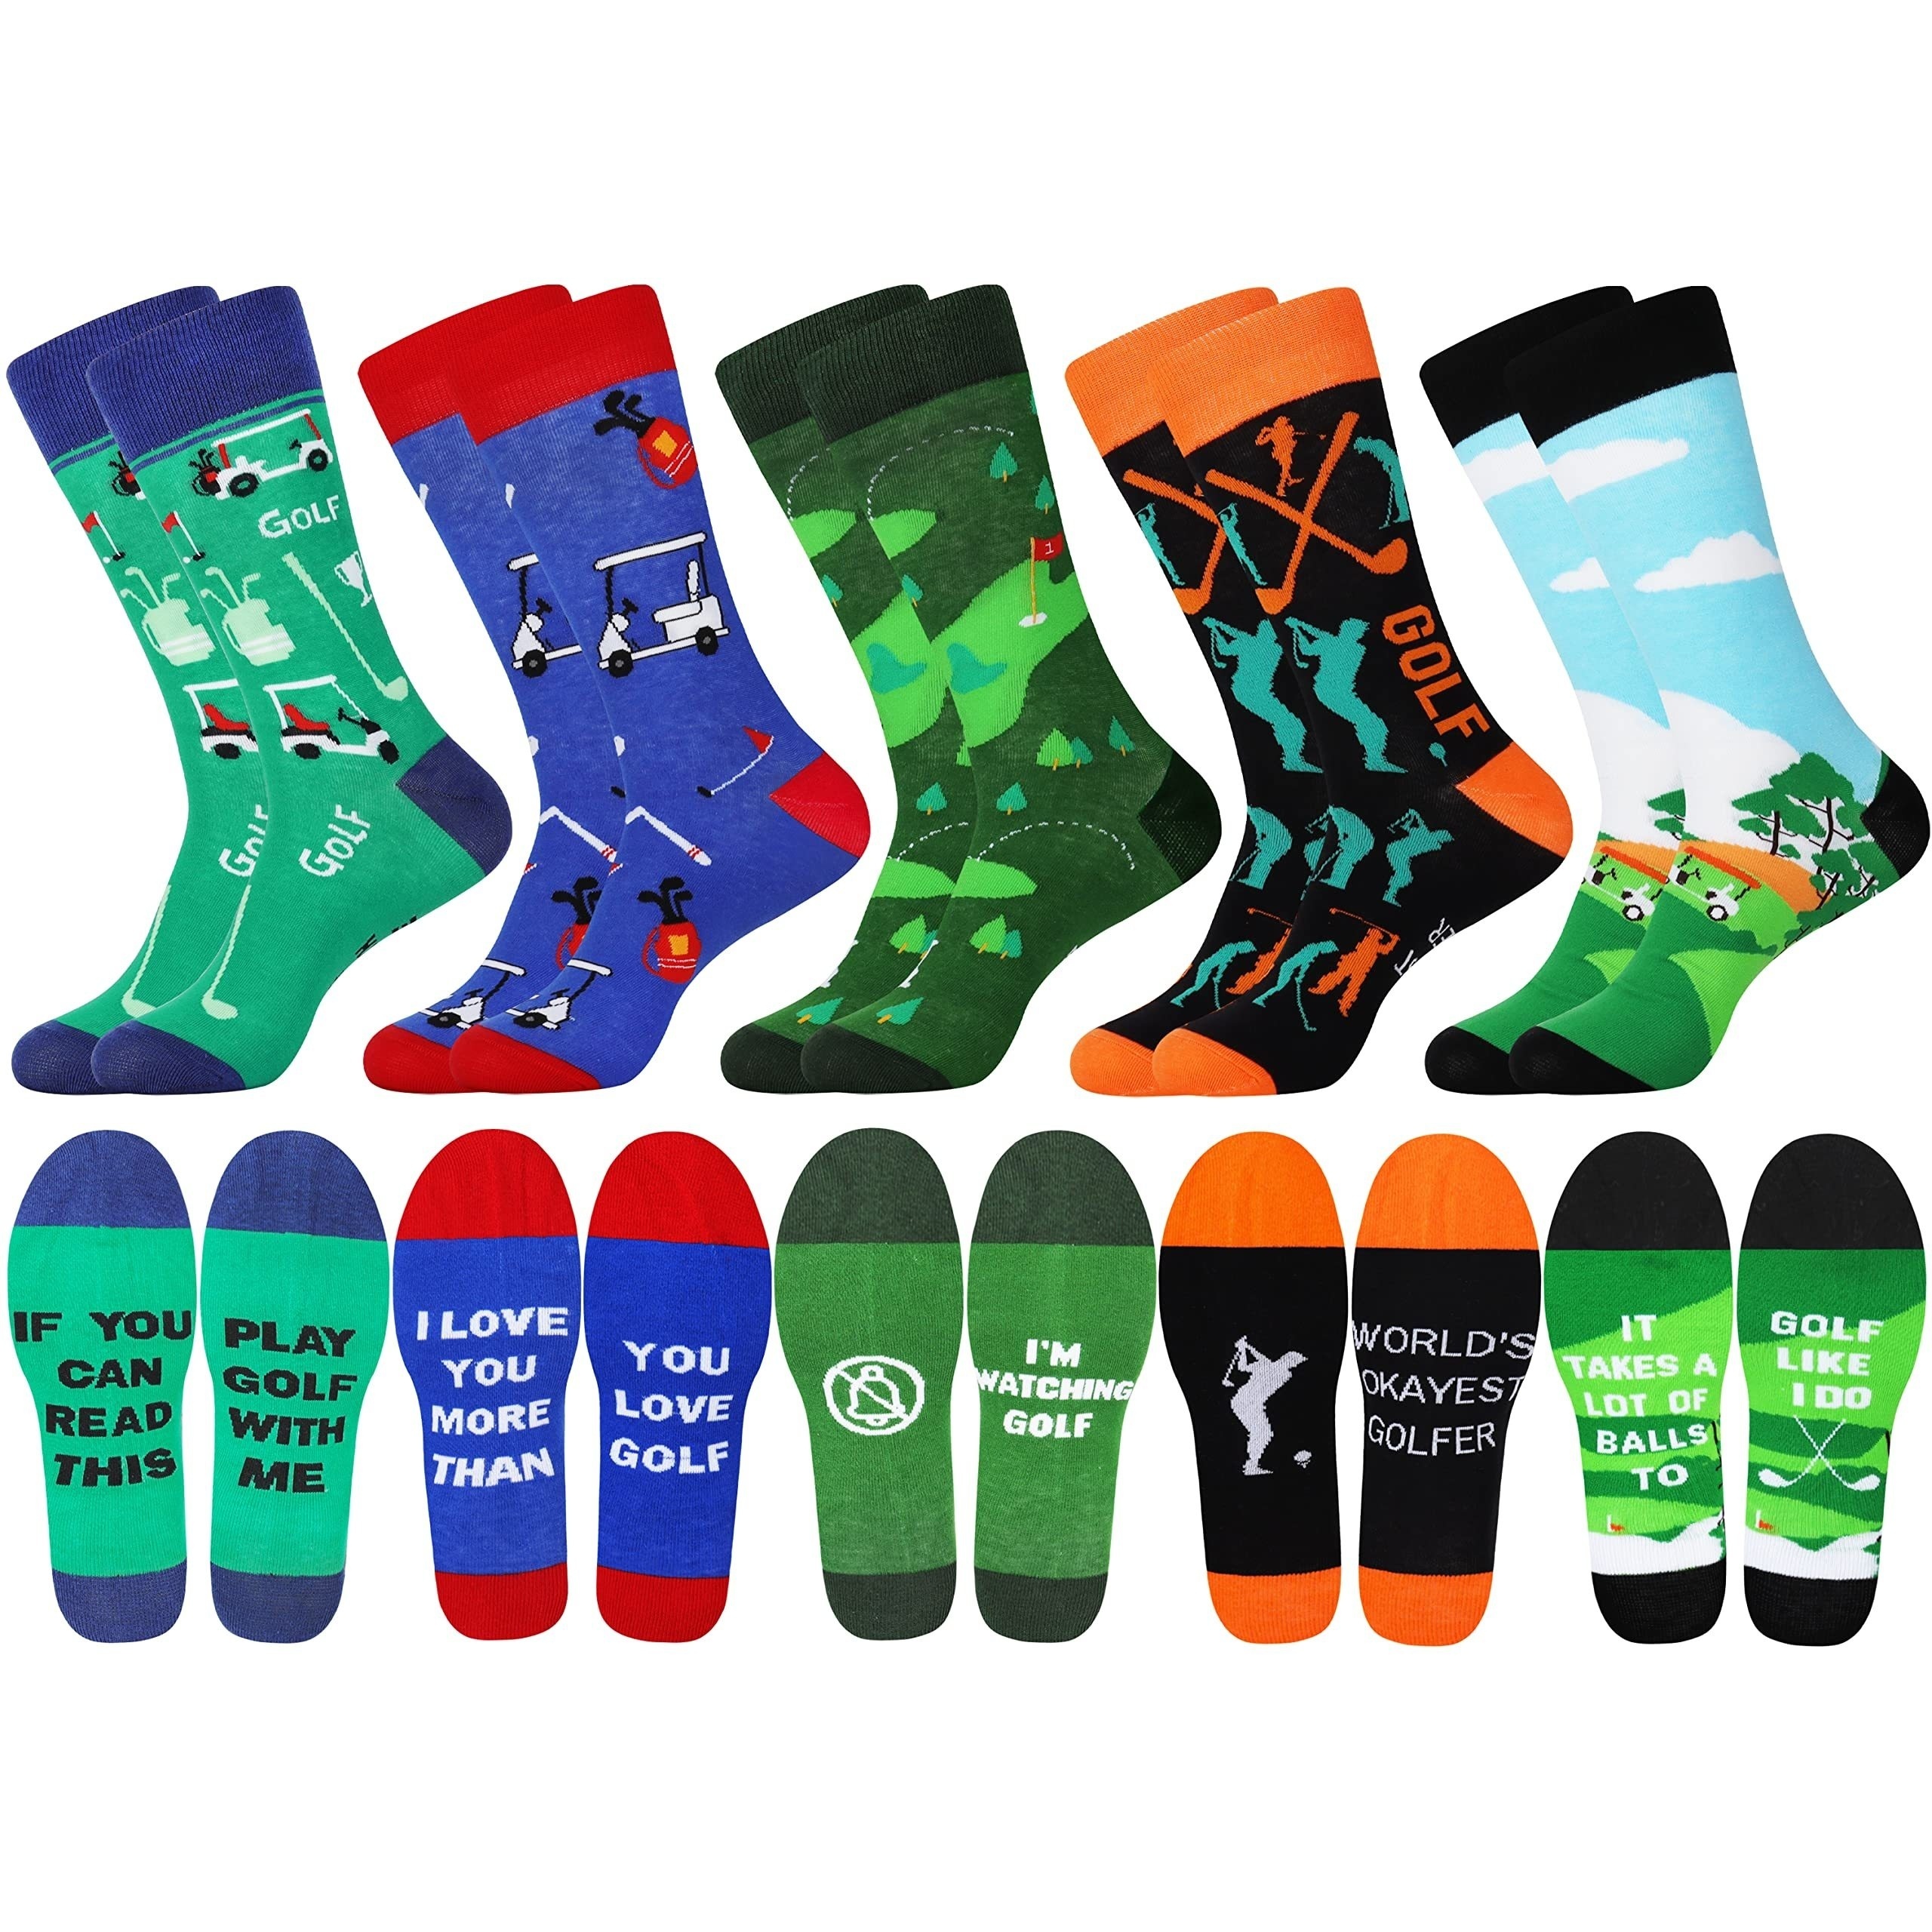 

5pairs Men's Funny Cool Saying Print Cotton Comfortable Crew Socks, Novelty Happy Golf Socks Gifts For Him Dad Grandpa Husband Uncle Golfer